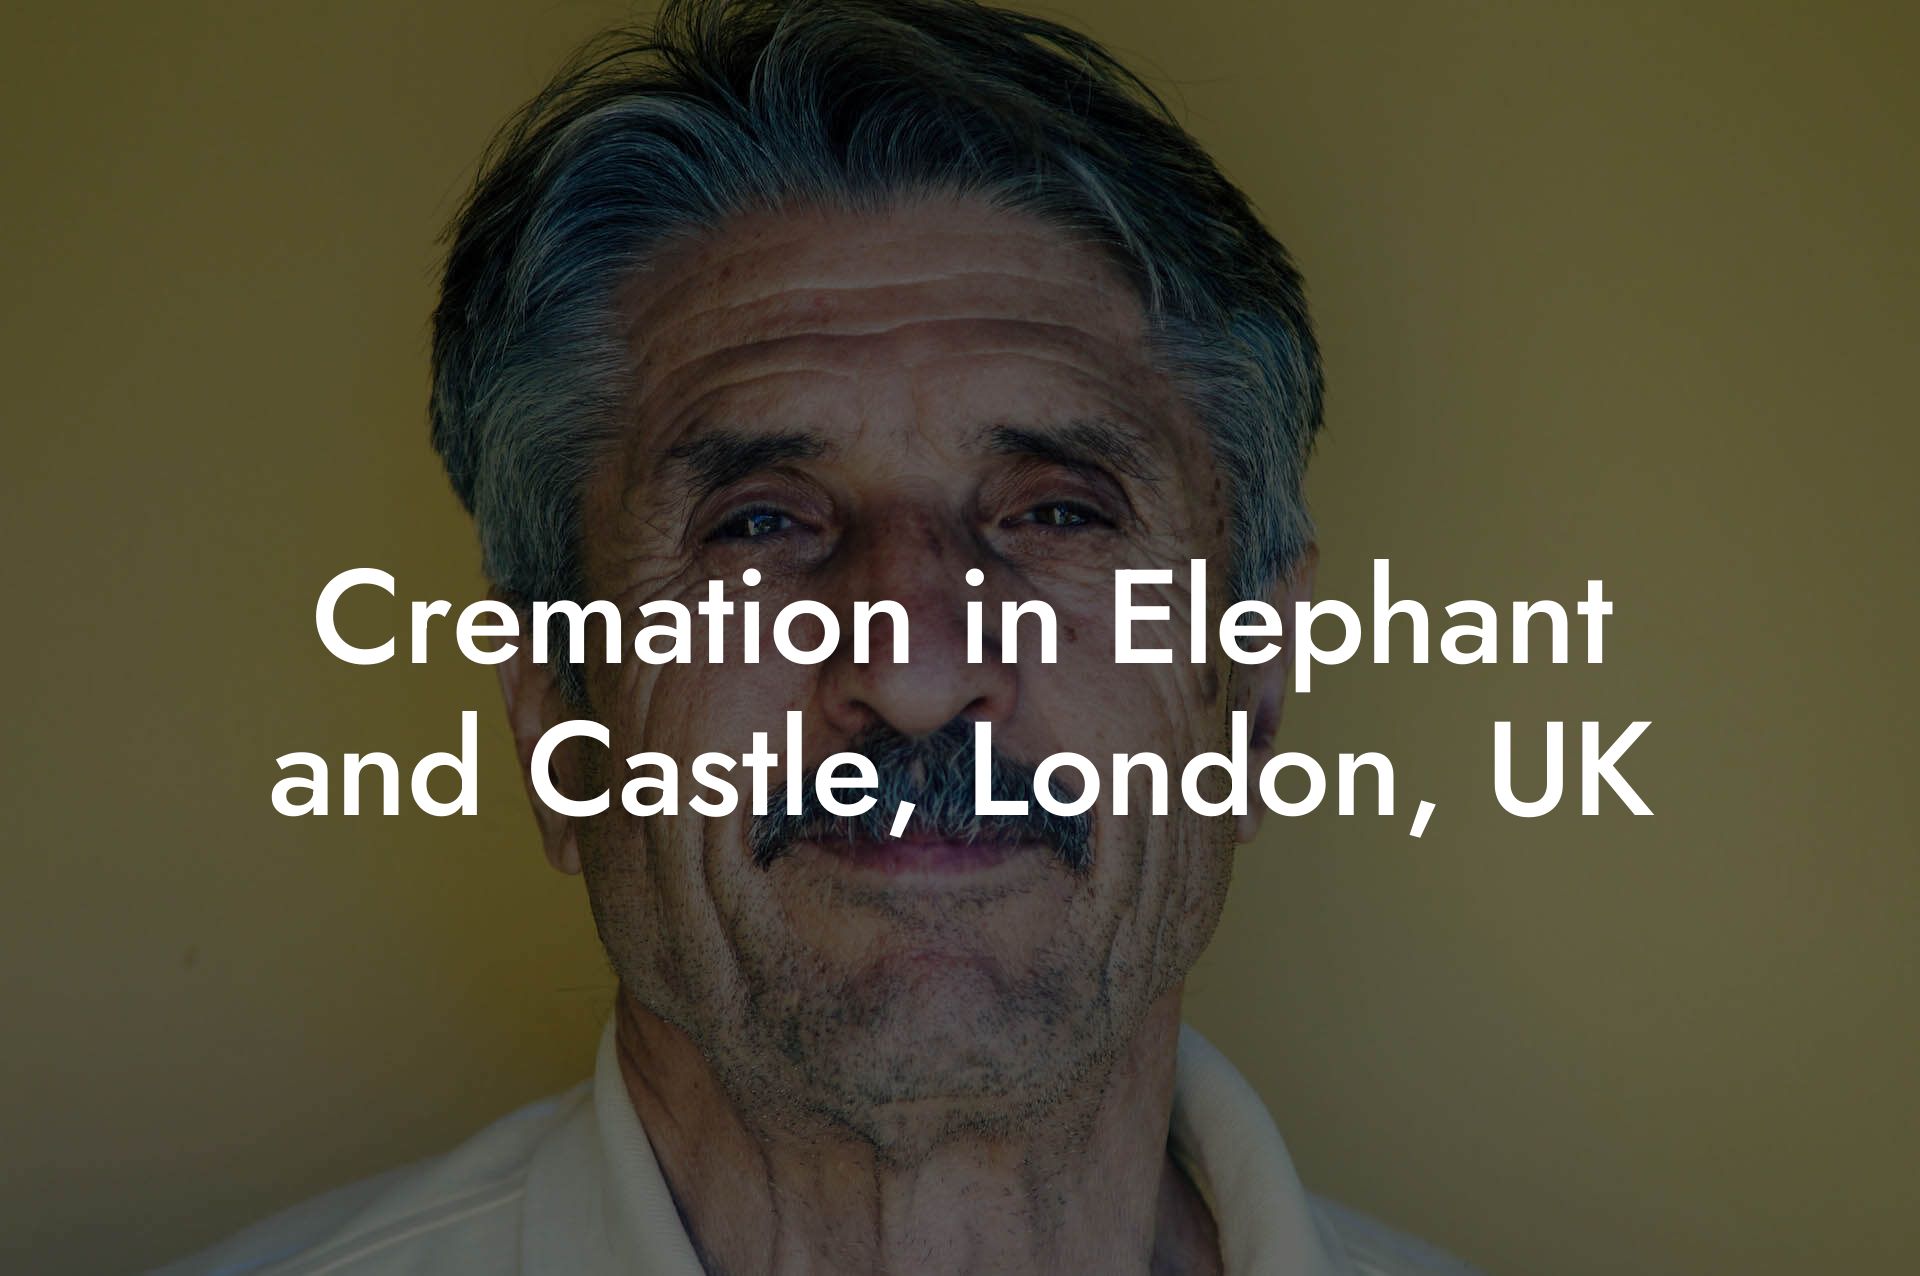 Cremation in Elephant and Castle, London, UK